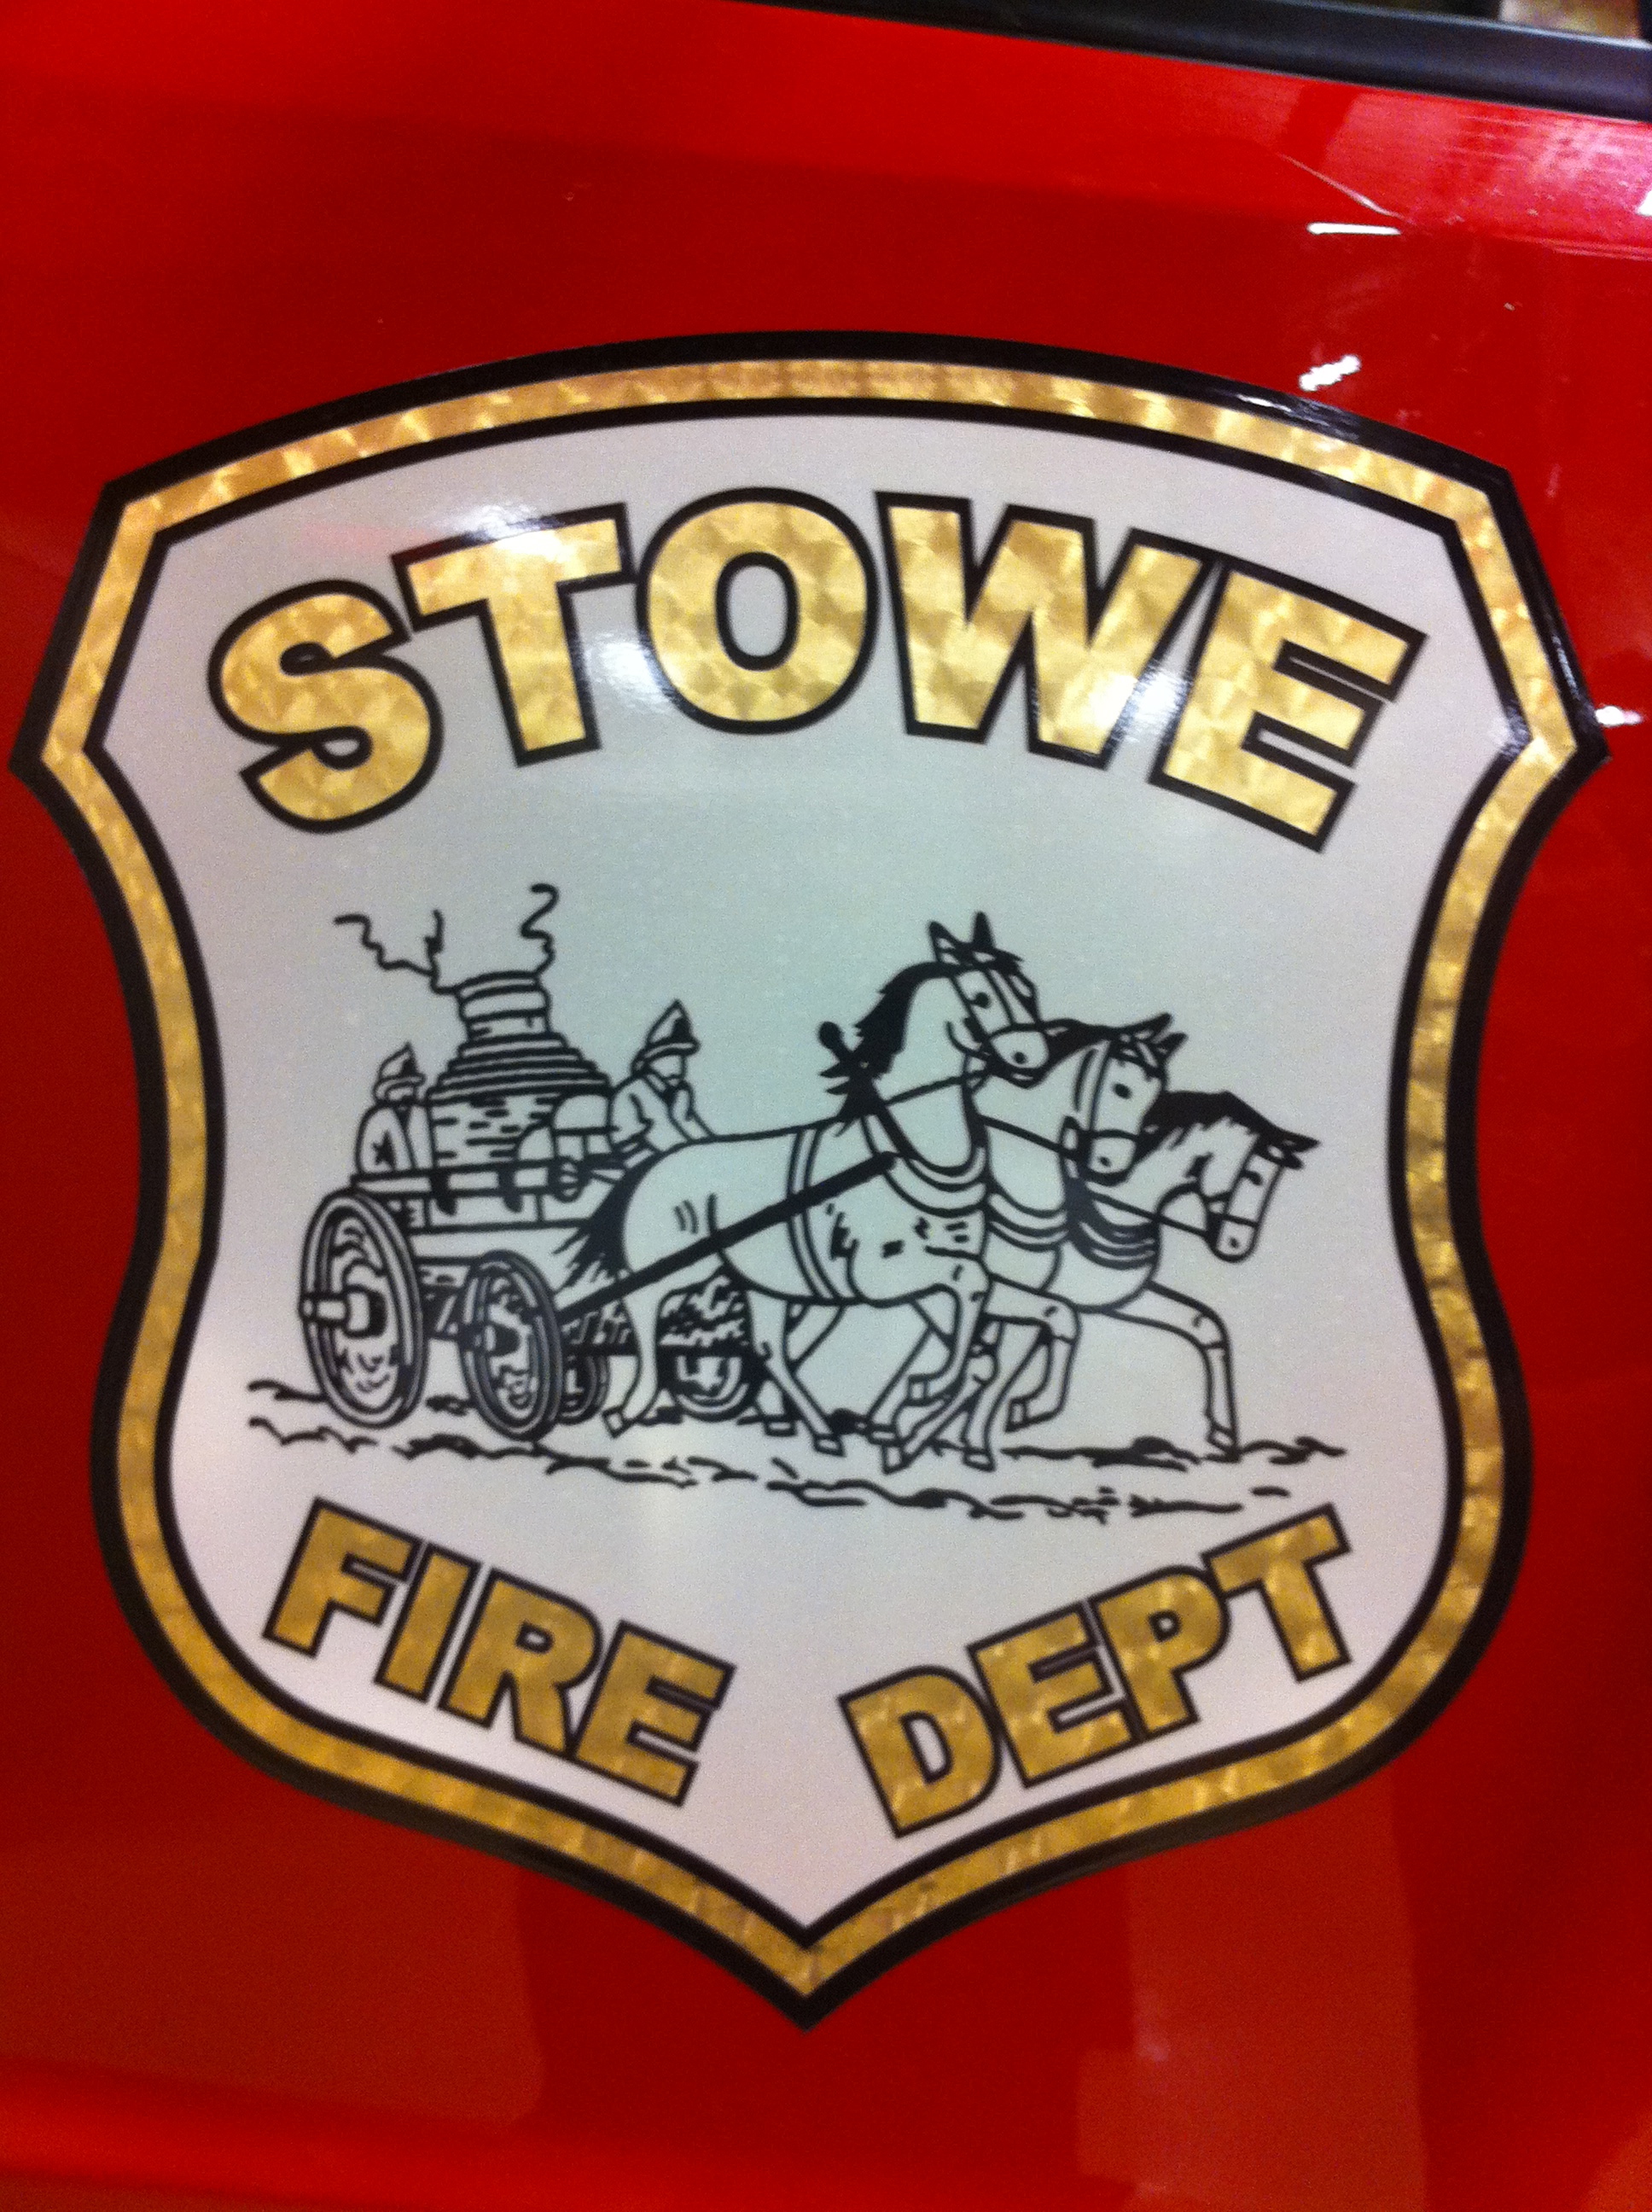 Situational Awareness and Decision Making program in Stowe